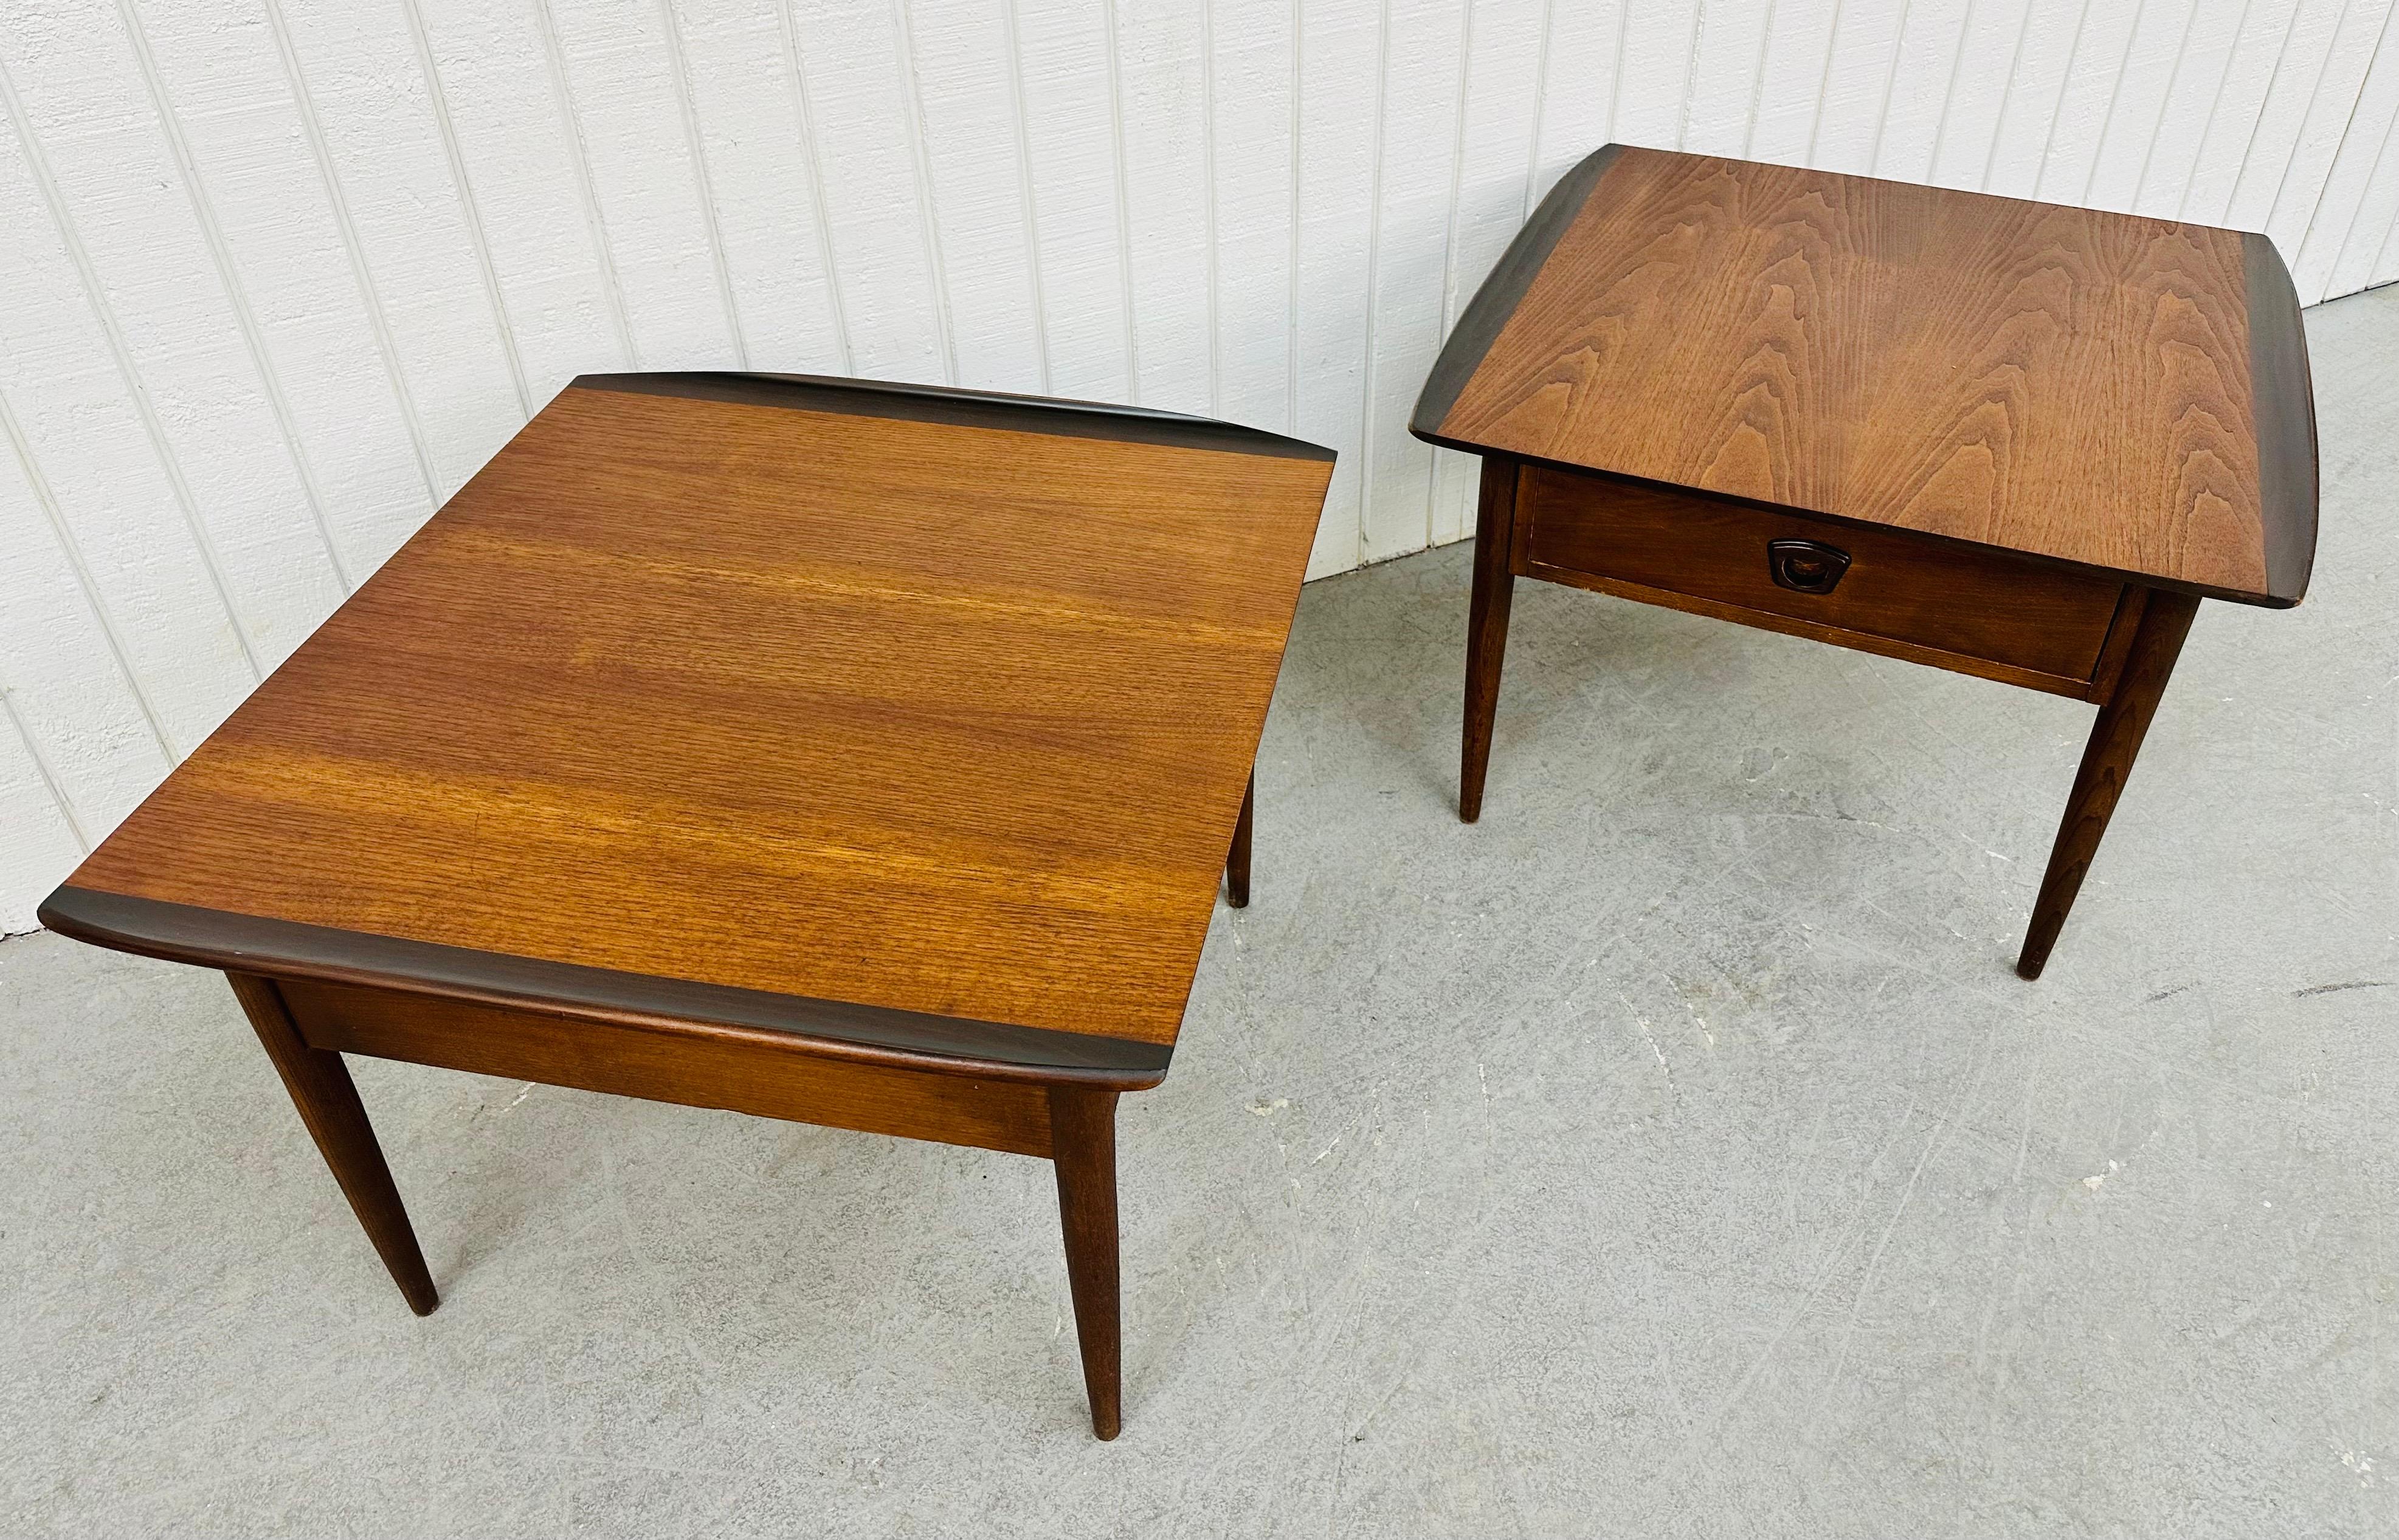 This listing is for a pair of Mid-Century Modern Lane Walnut Side Tables. Featuring a straight line design, rectangular top with curved edge, single drawer for storage, four modern legs, and a beautiful walnut finish. This is an exceptional